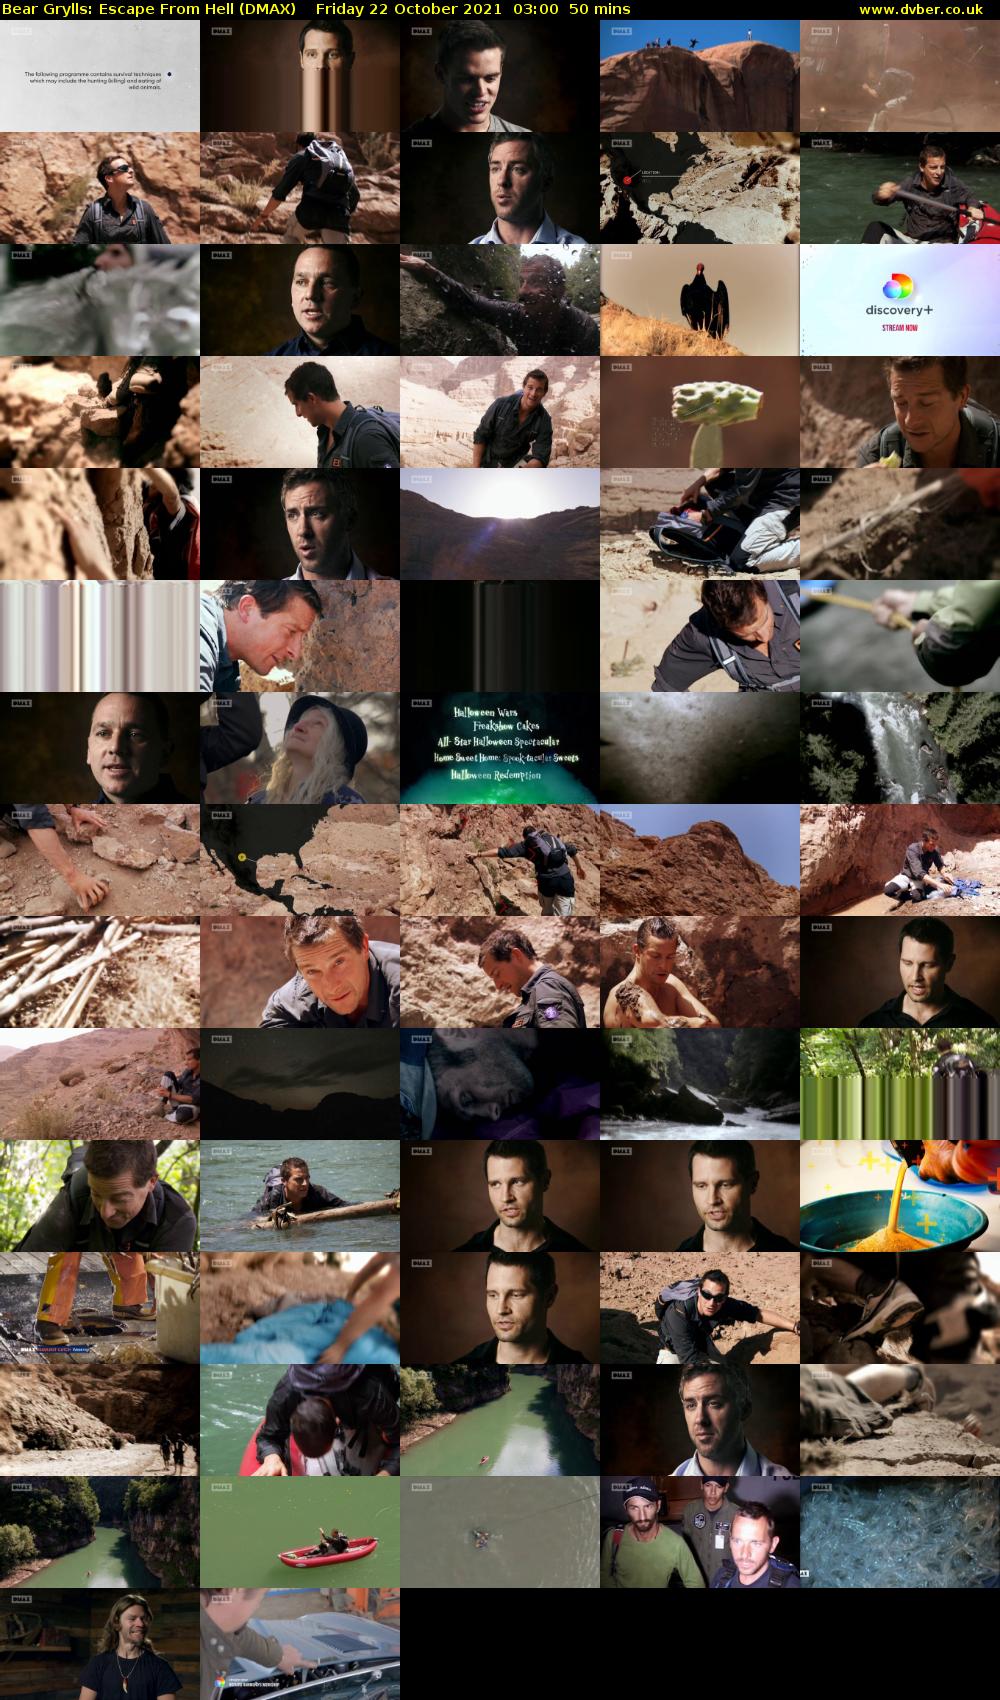 Bear Grylls: Escape From Hell (DMAX) Friday 22 October 2021 03:00 - 03:50